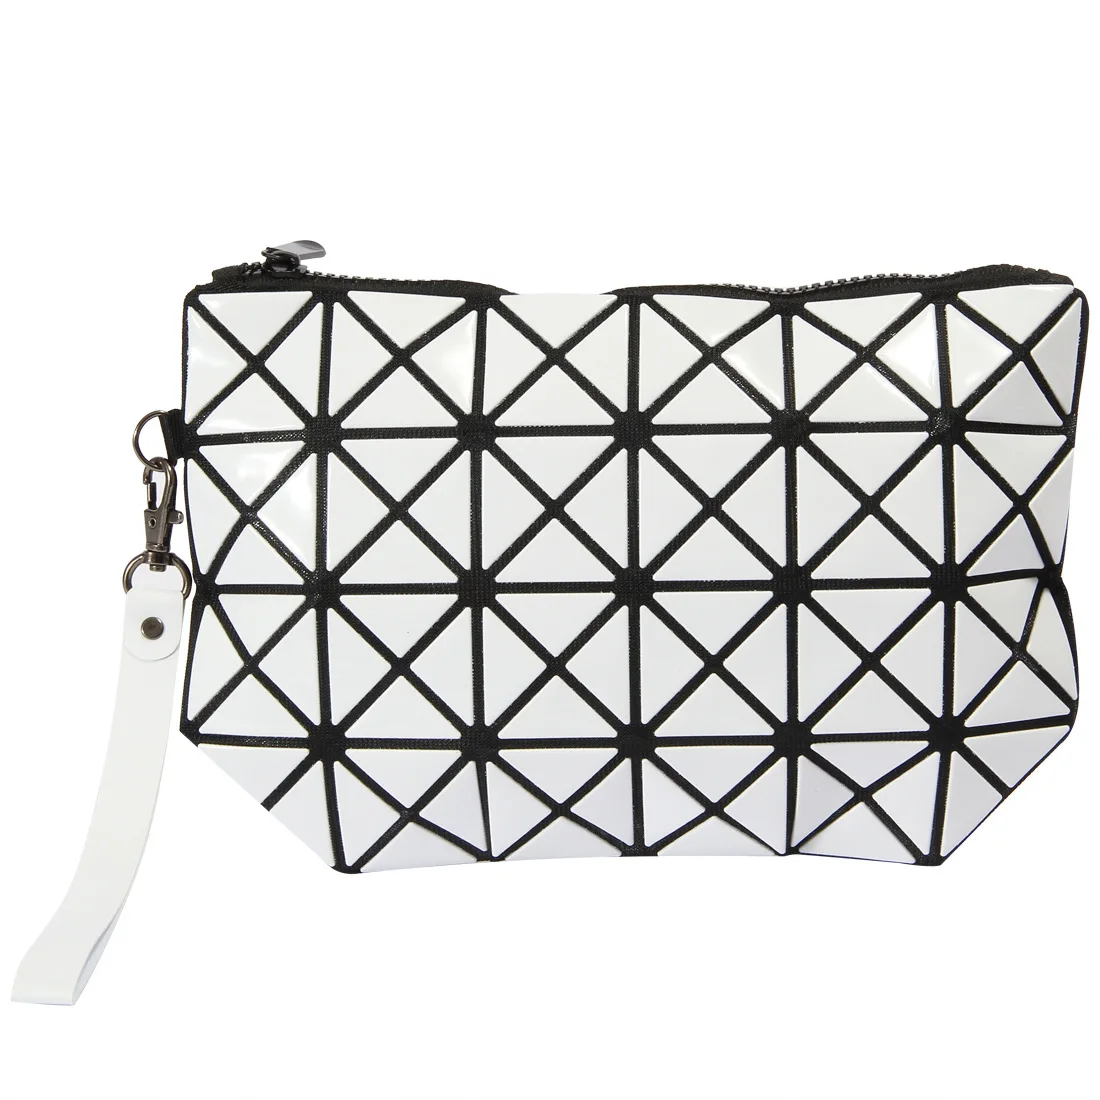 

Hot Selling Geometric Rhombus Folding Portable Cosmetic Make Up Case Bag For Ladies, As pictures